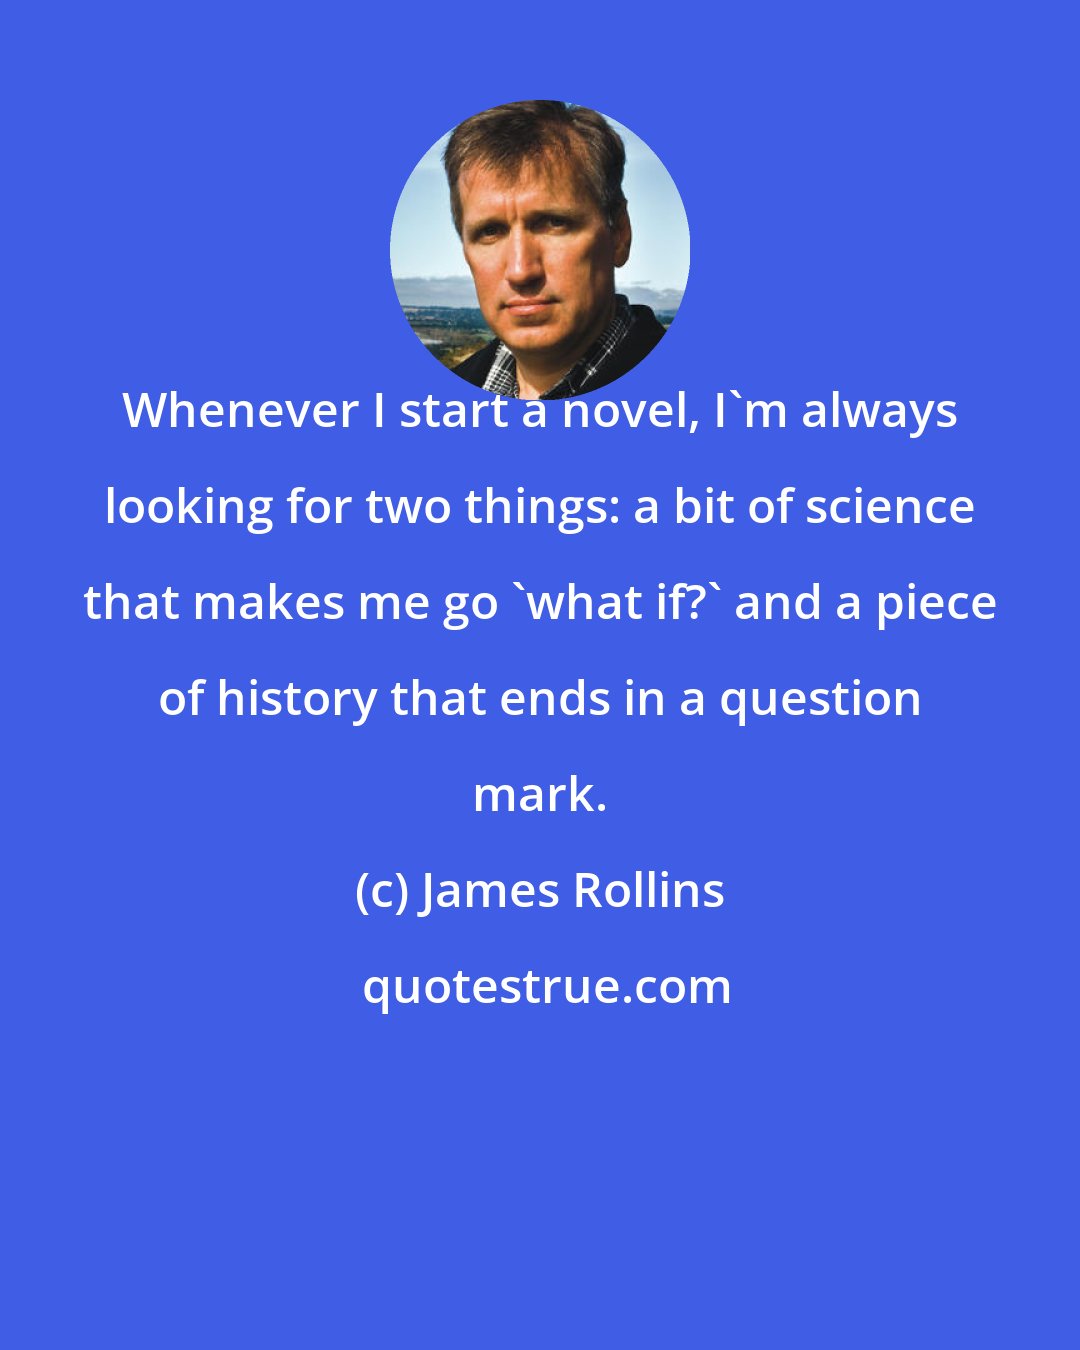 James Rollins: Whenever I start a novel, I'm always looking for two things: a bit of science that makes me go 'what if?' and a piece of history that ends in a question mark.